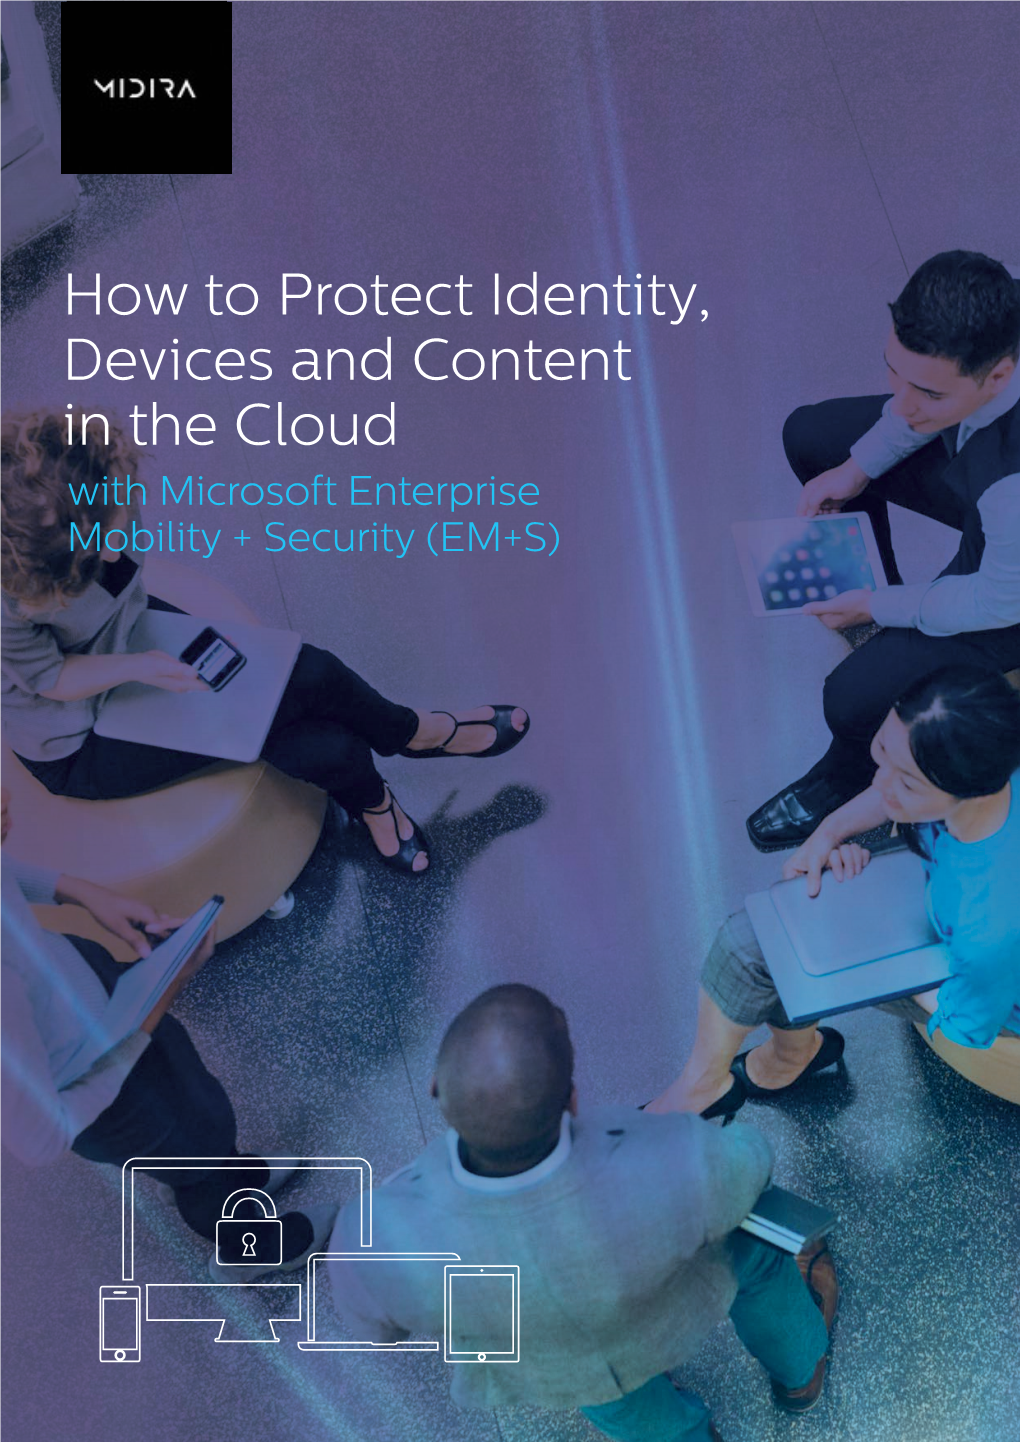 How to Protect Identity, Devices and Content in the Cloud